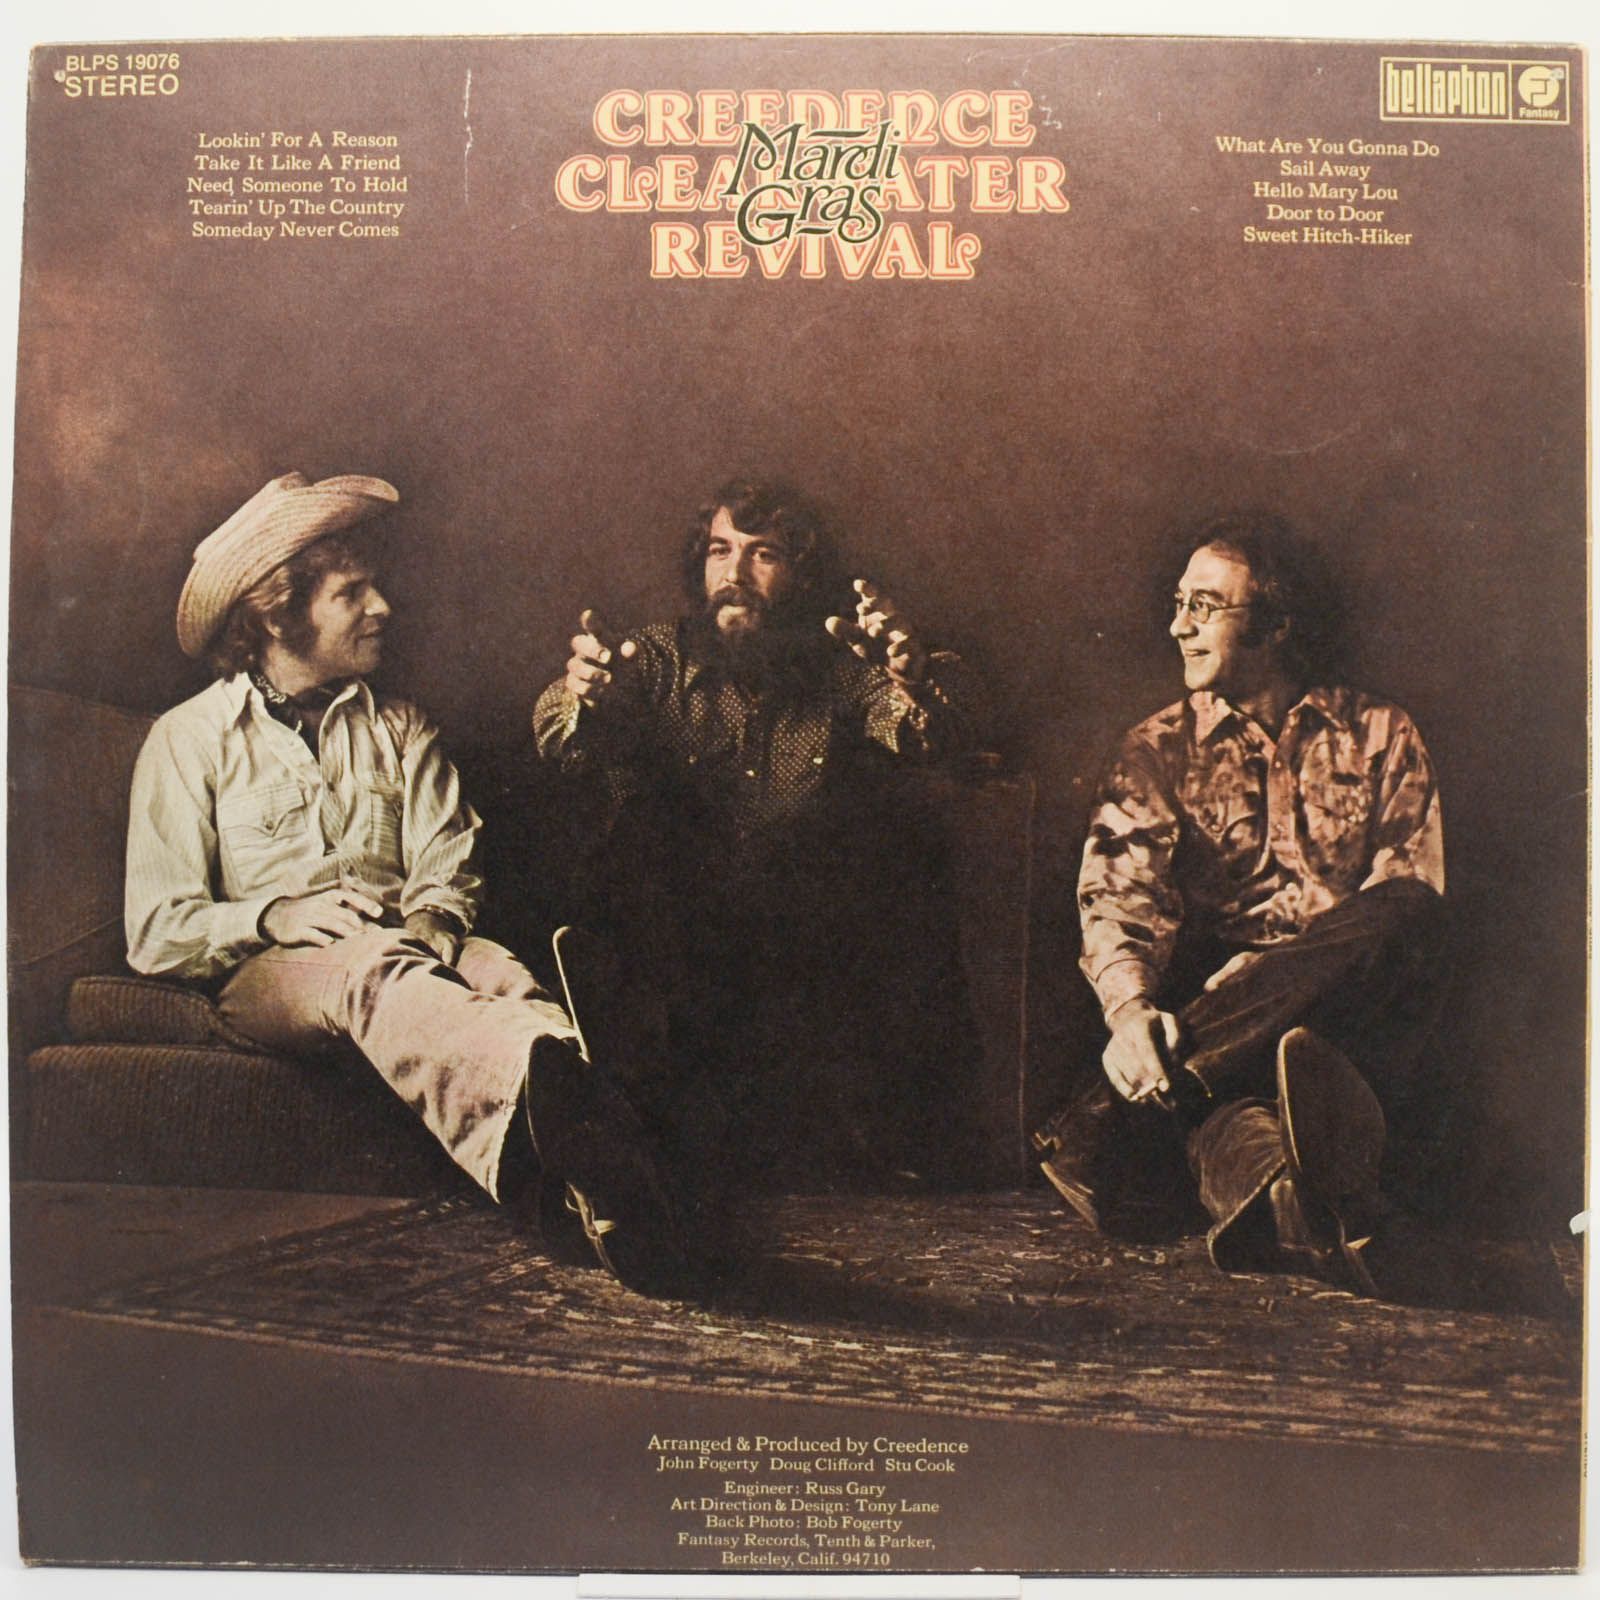 Creedence Clearwater Revival — Mardi Gras, 1972